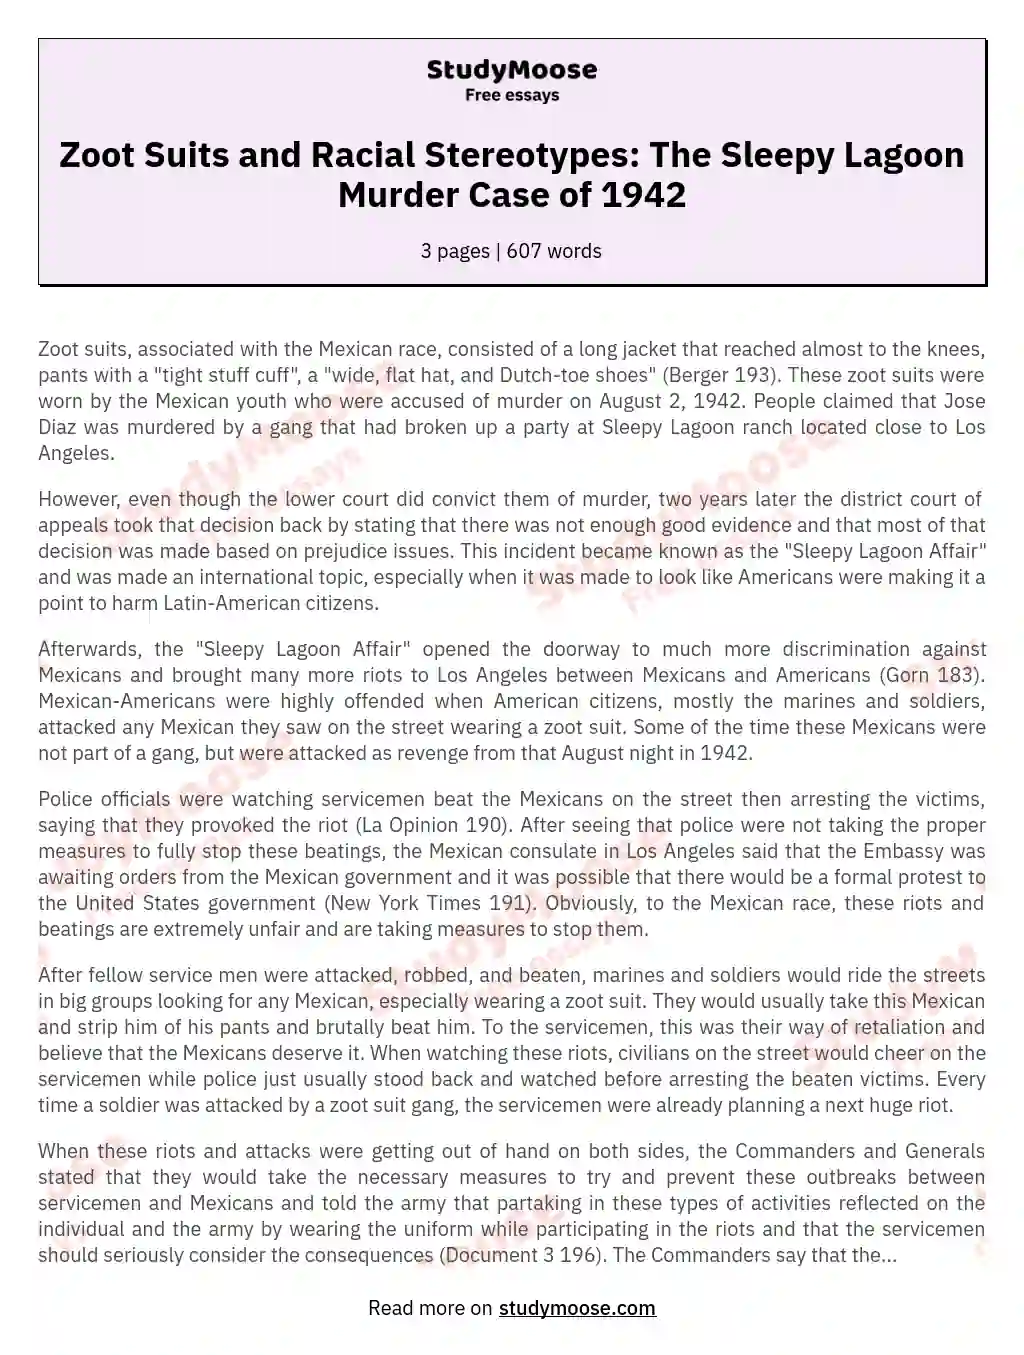 Zoot Suits and Racial Stereotypes: The Sleepy Lagoon Murder Case of 1942 essay